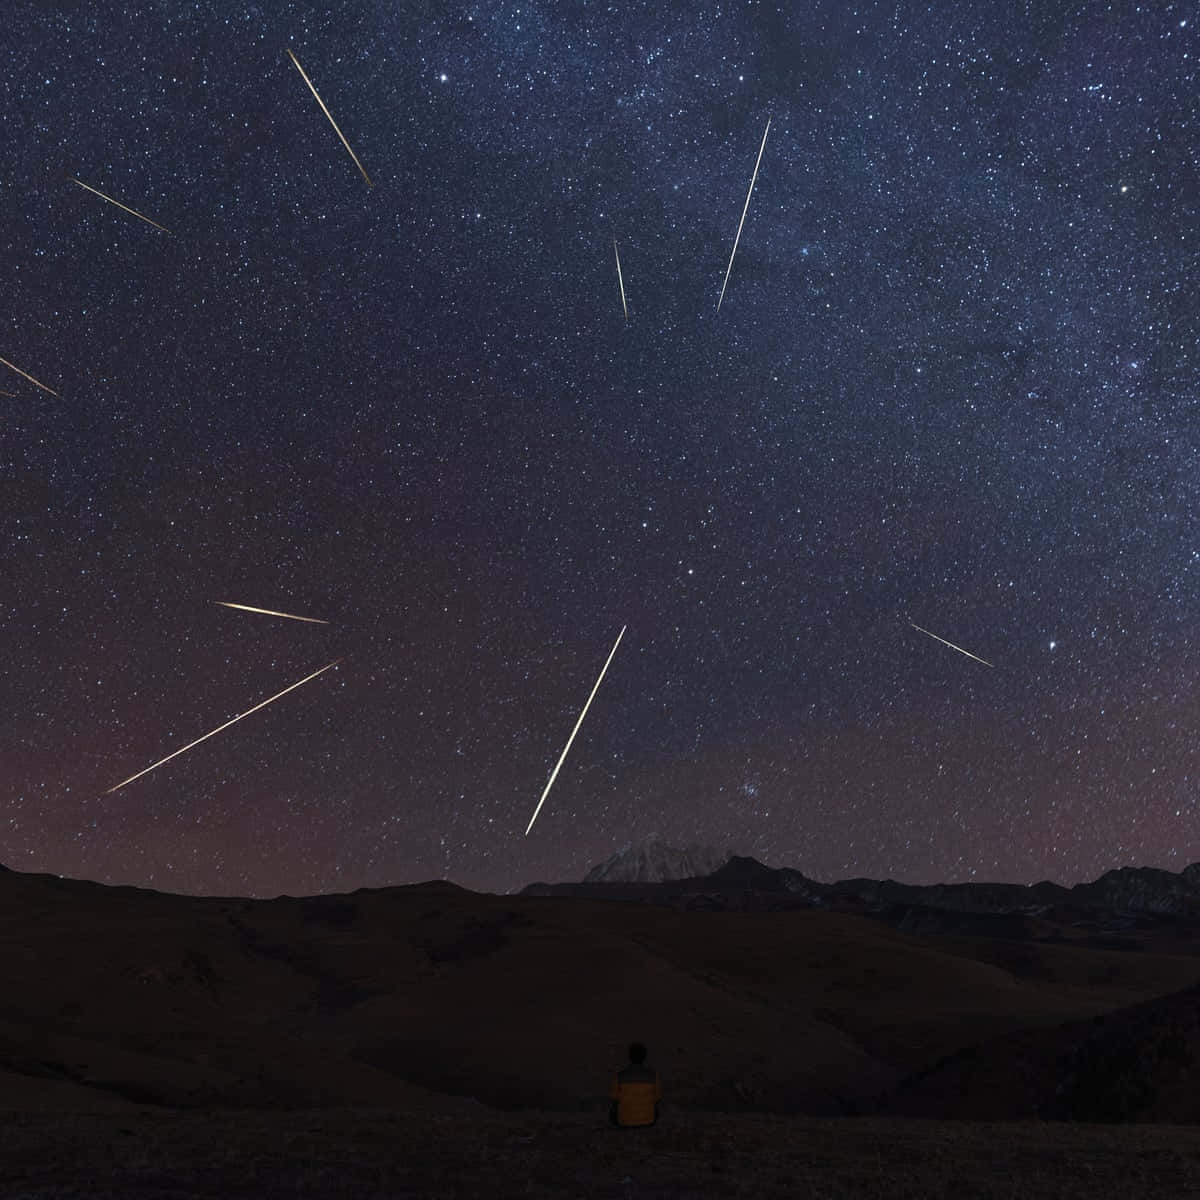 Streaking Through The Night Sky: A Meteor Crossing